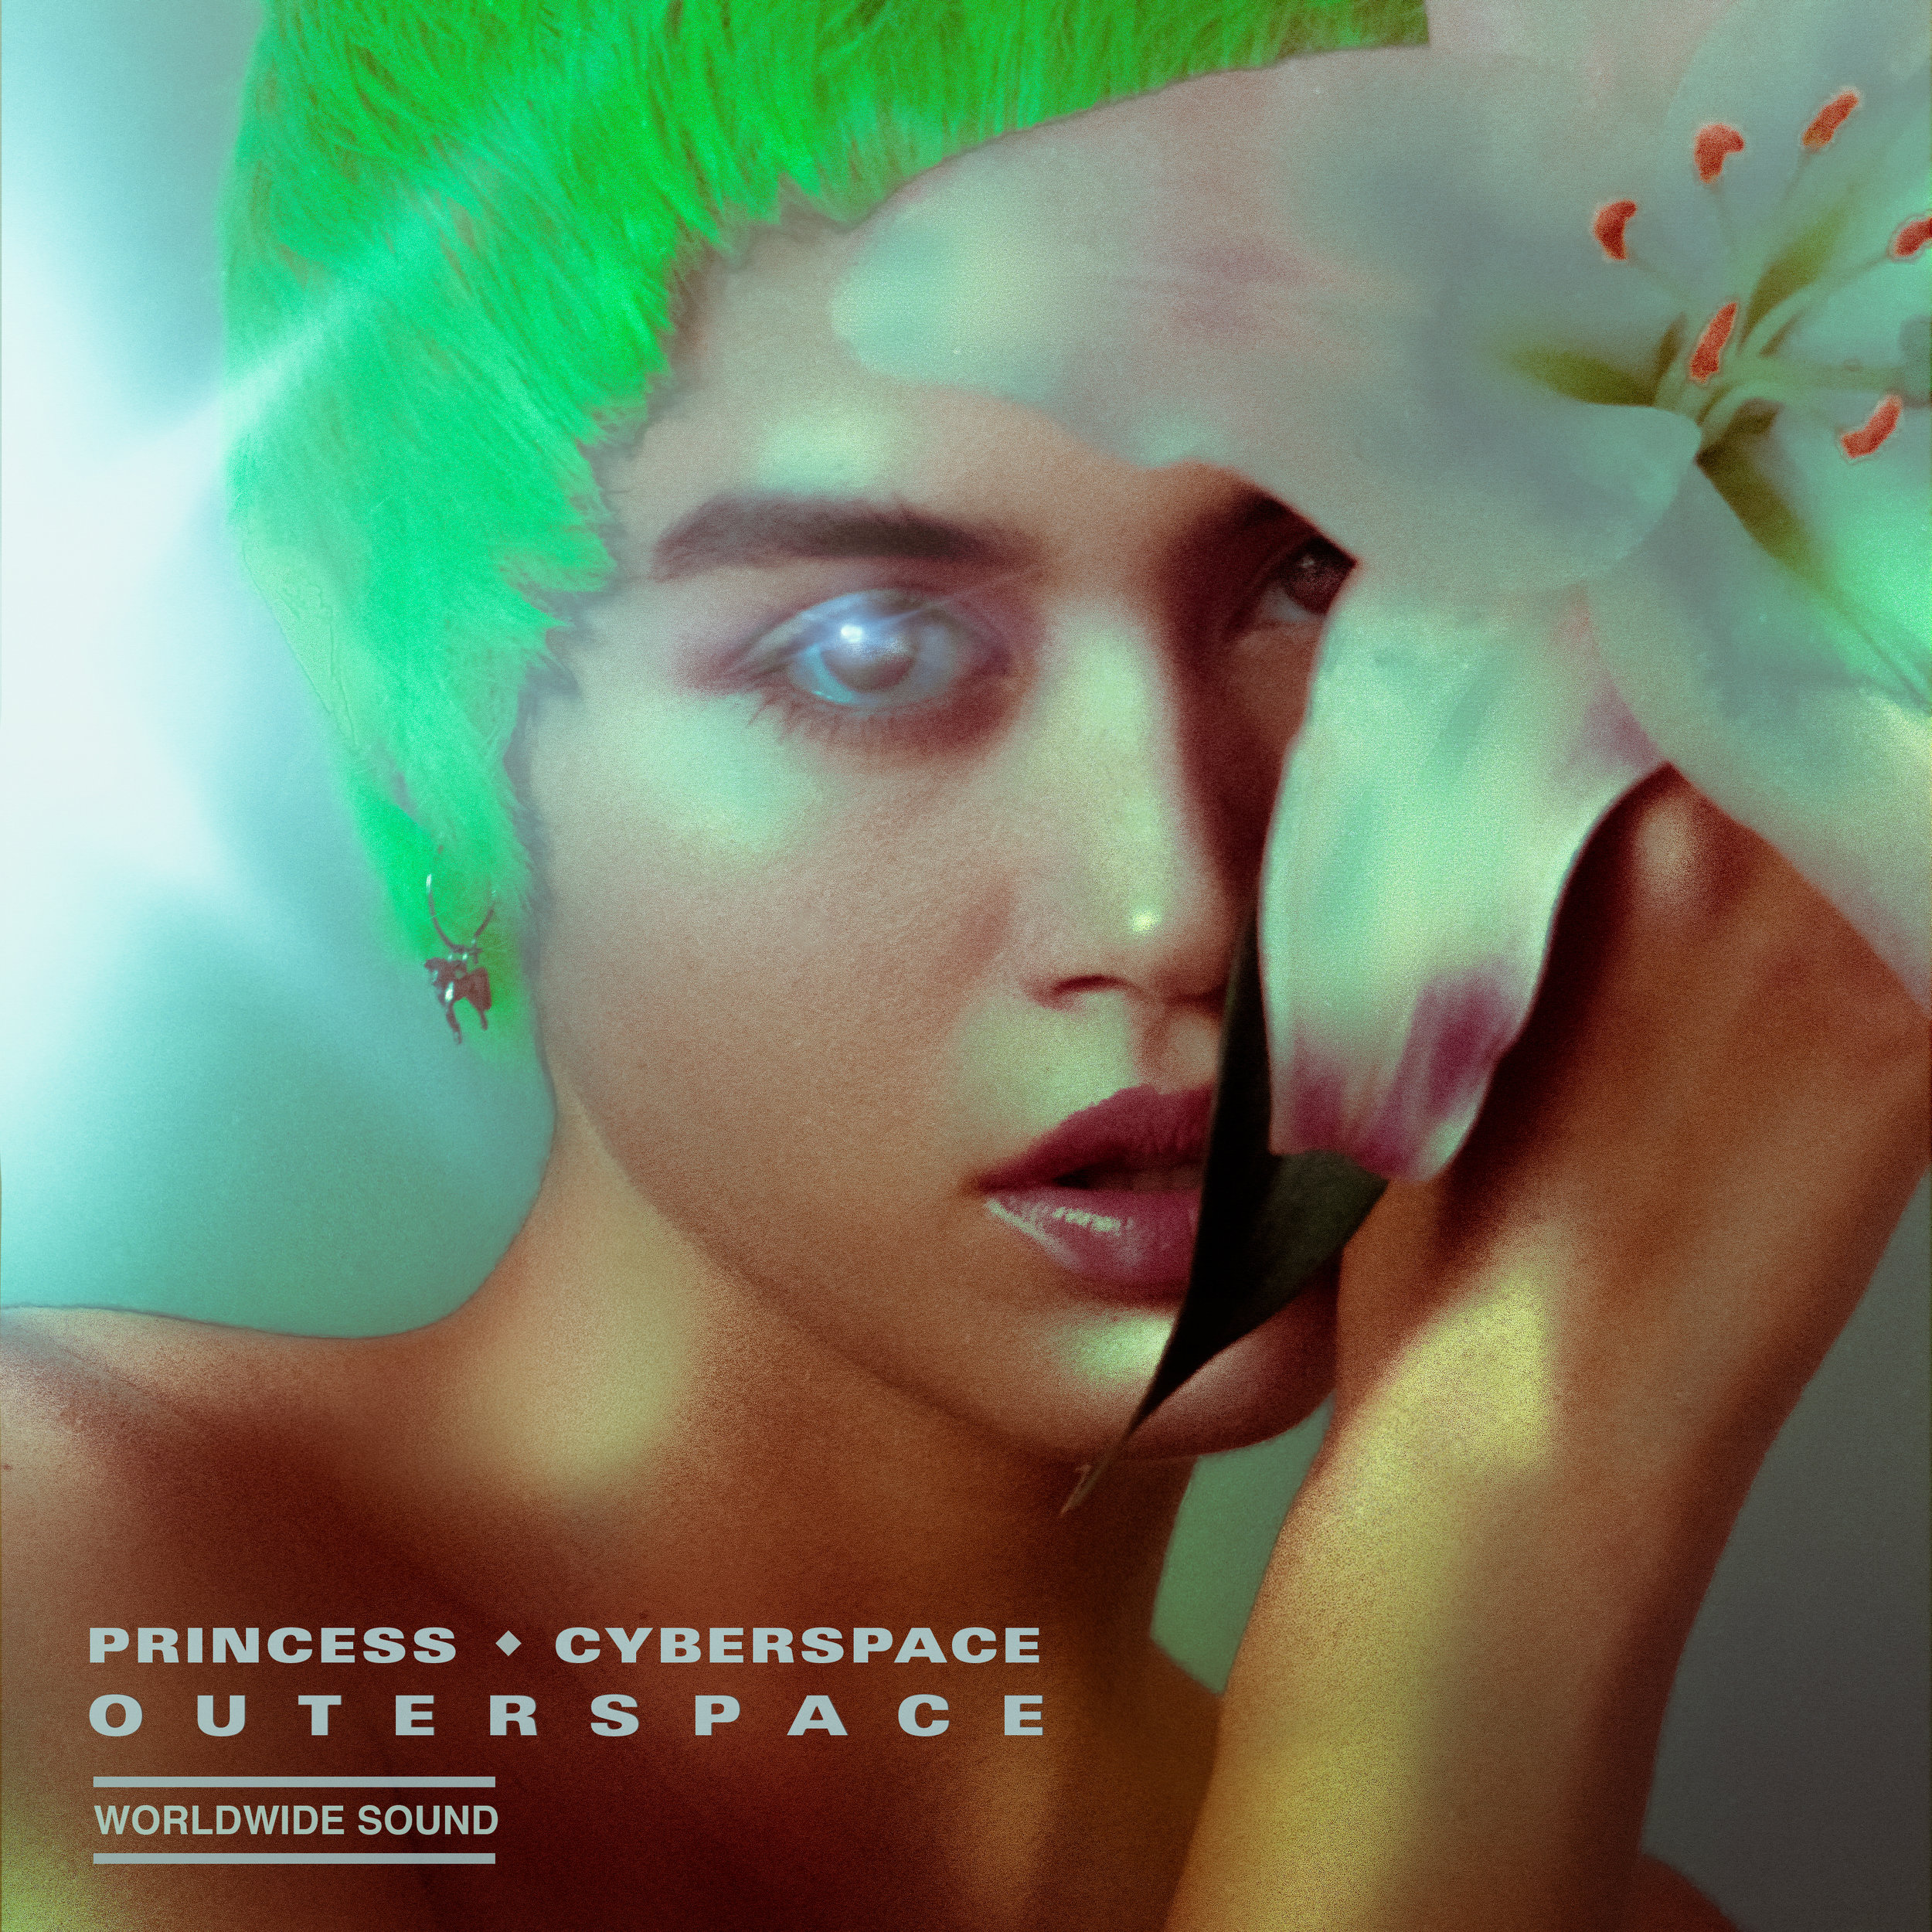 Princess Cyberspace - %22Outerspace%22 - [Worldwide Sound Exclusive] - Artwork.jpg